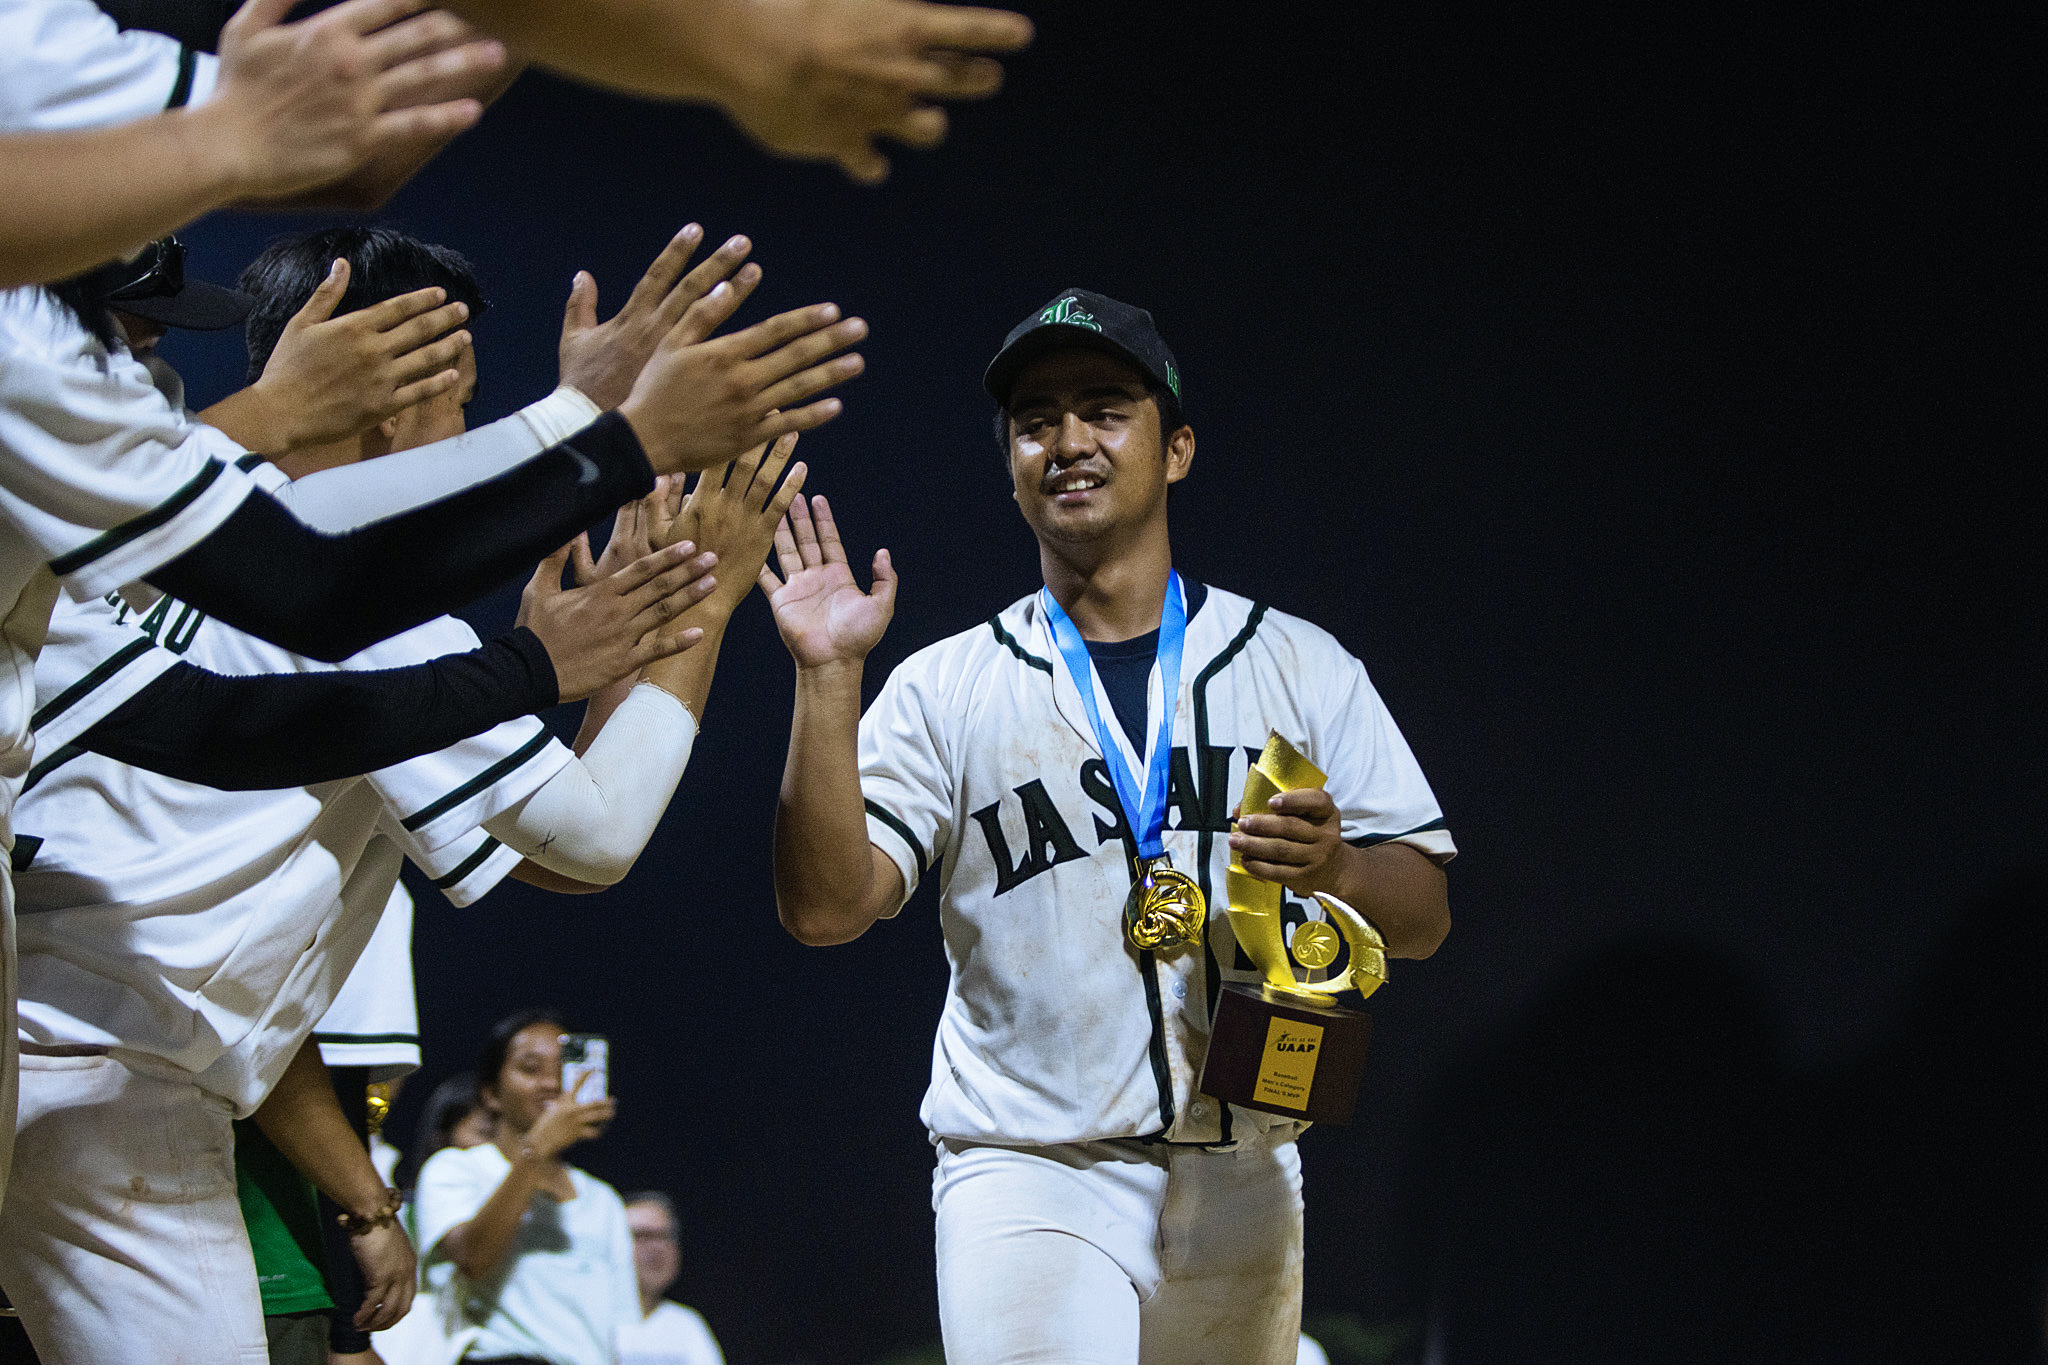 Back-to-back UAAP champions, the DLSU Green Batters (photographed by Zoila Caga, The LaSallian)